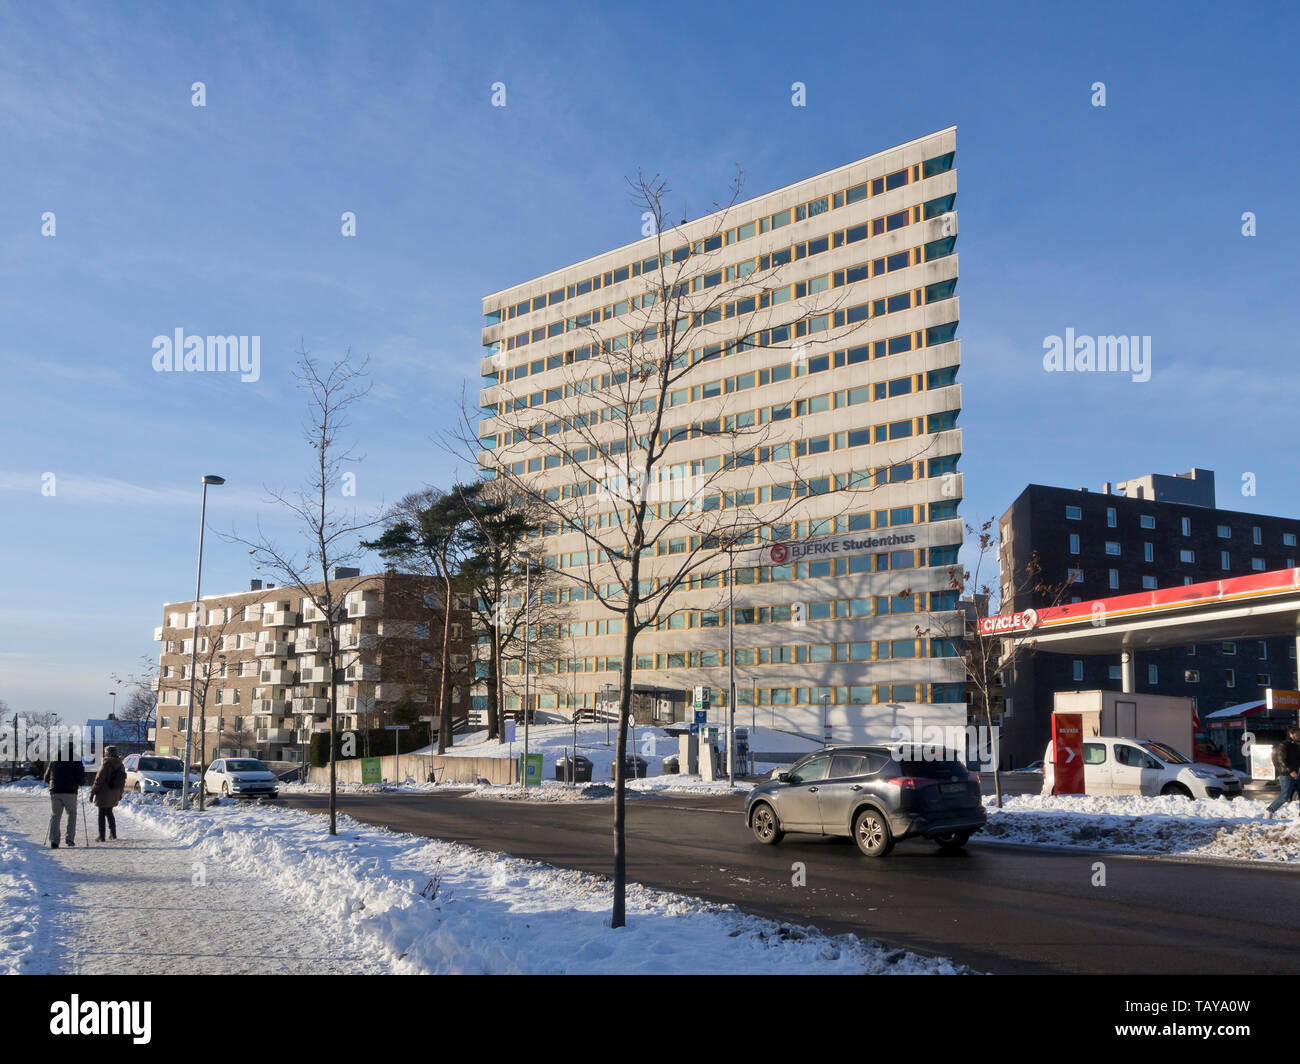 Bjerke student house, accommodation in Oslo Norway for students from out of town in a triangular tower block, architects Borgen og Bing Lorentzen Stock Photo